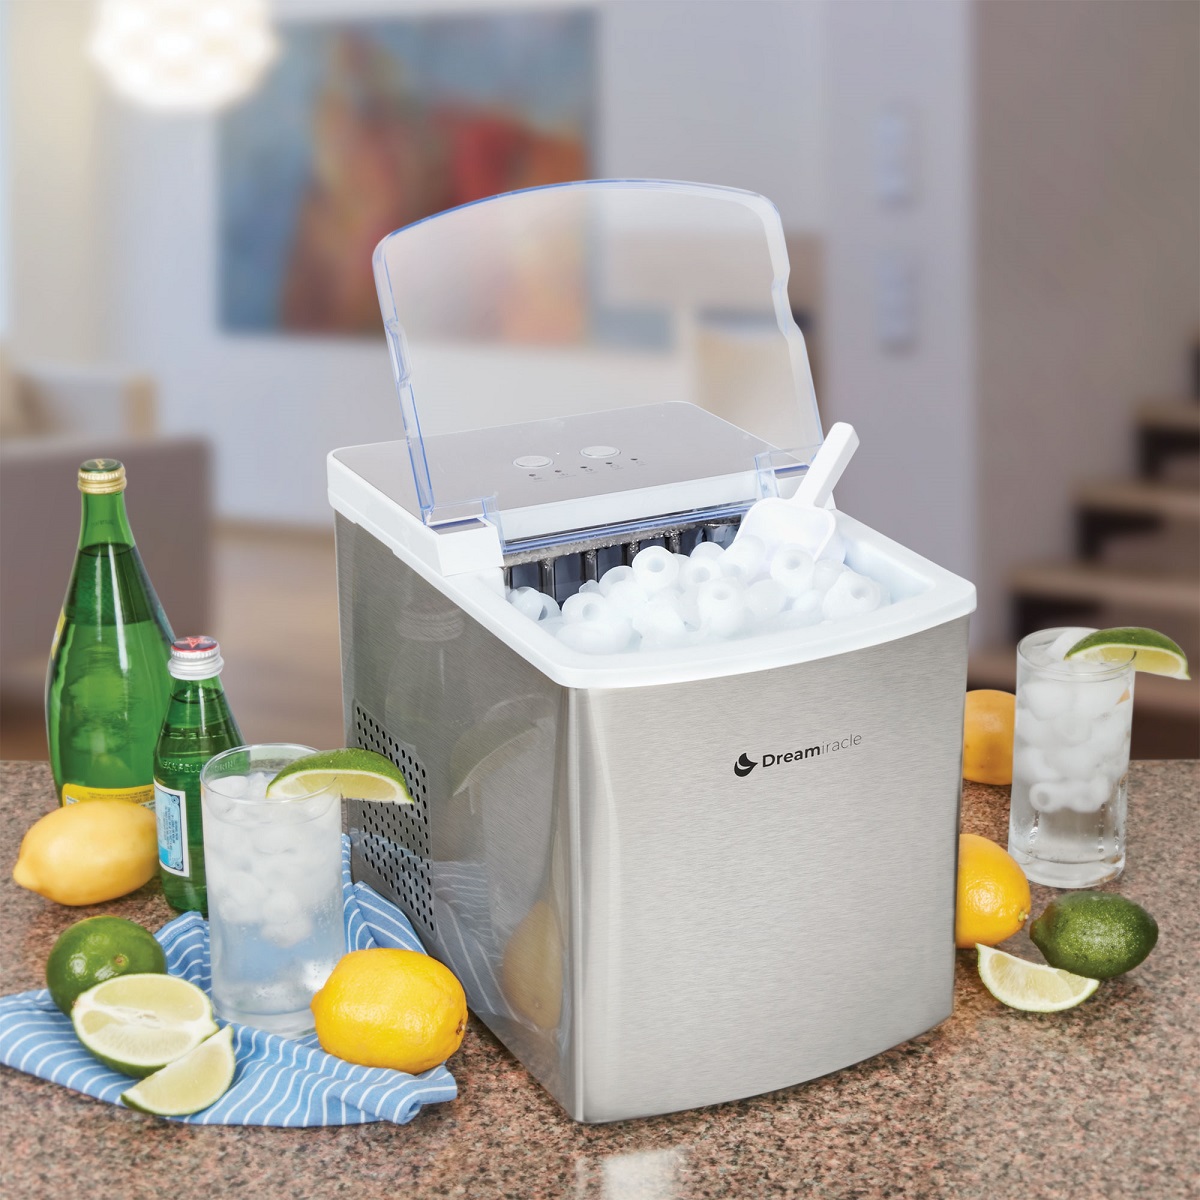 Dreamiracle Ice Maker How To Clean